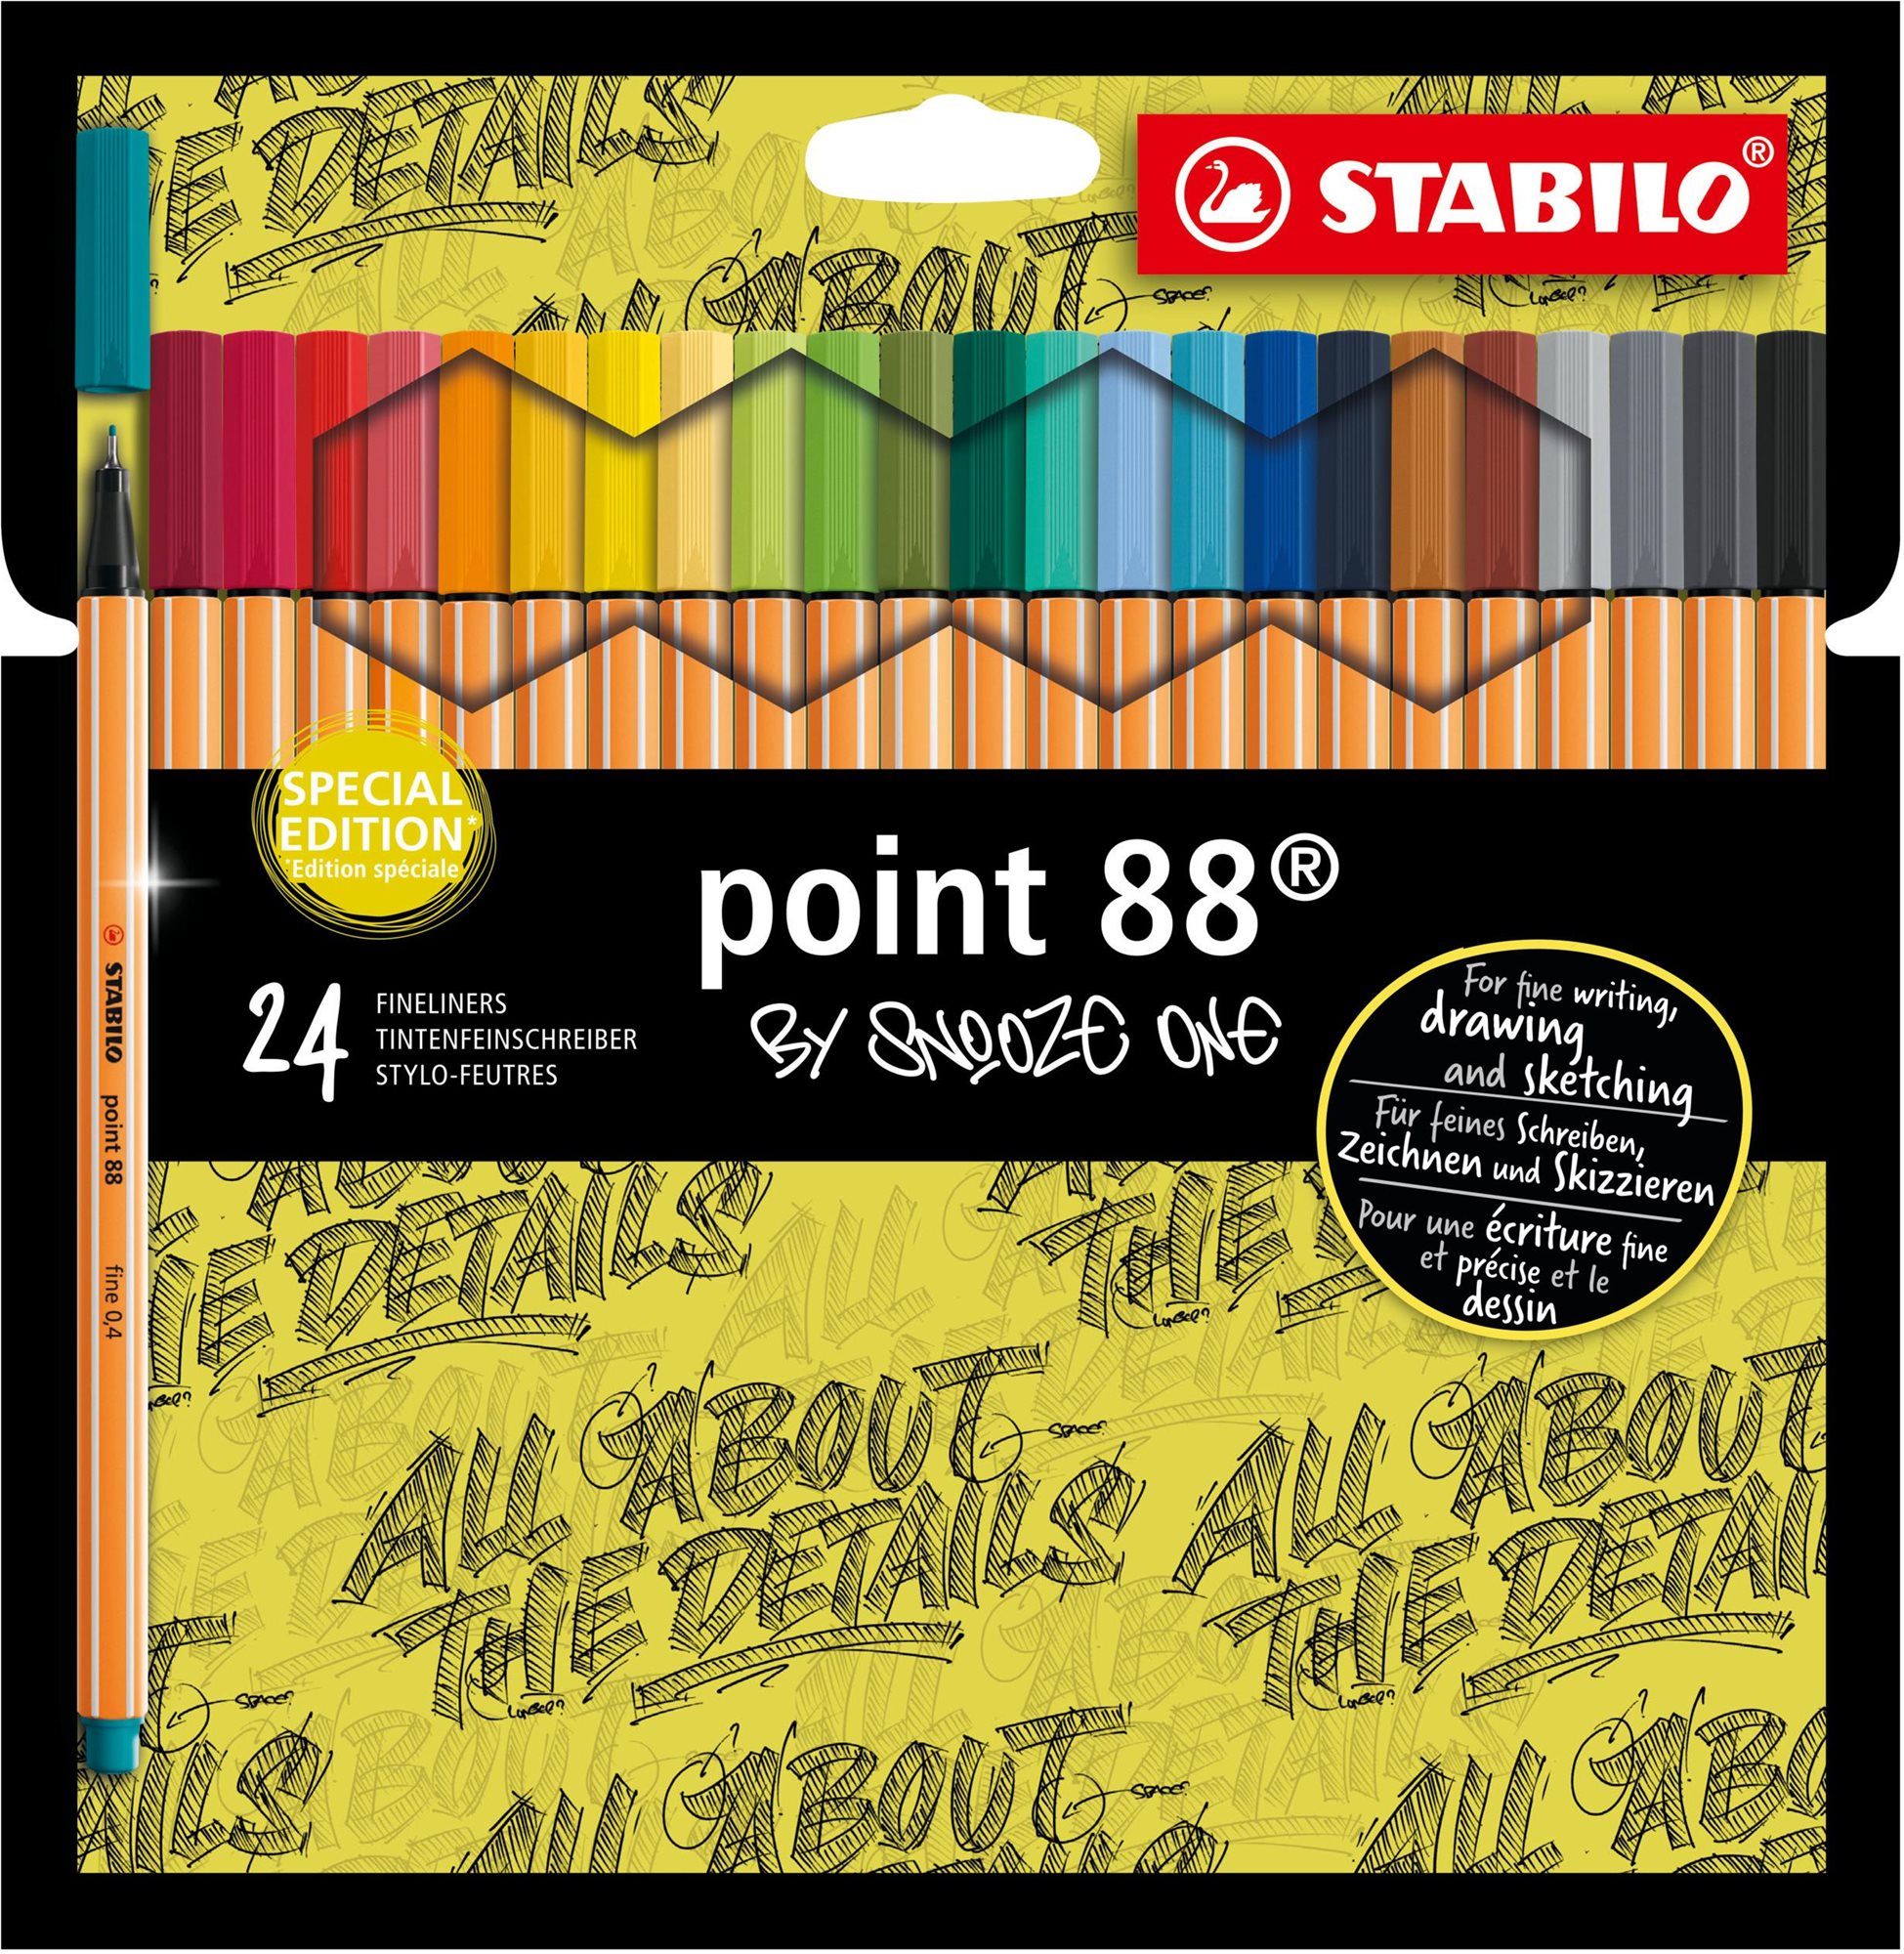 STABILO point 88 Snooze One Edition 24 db